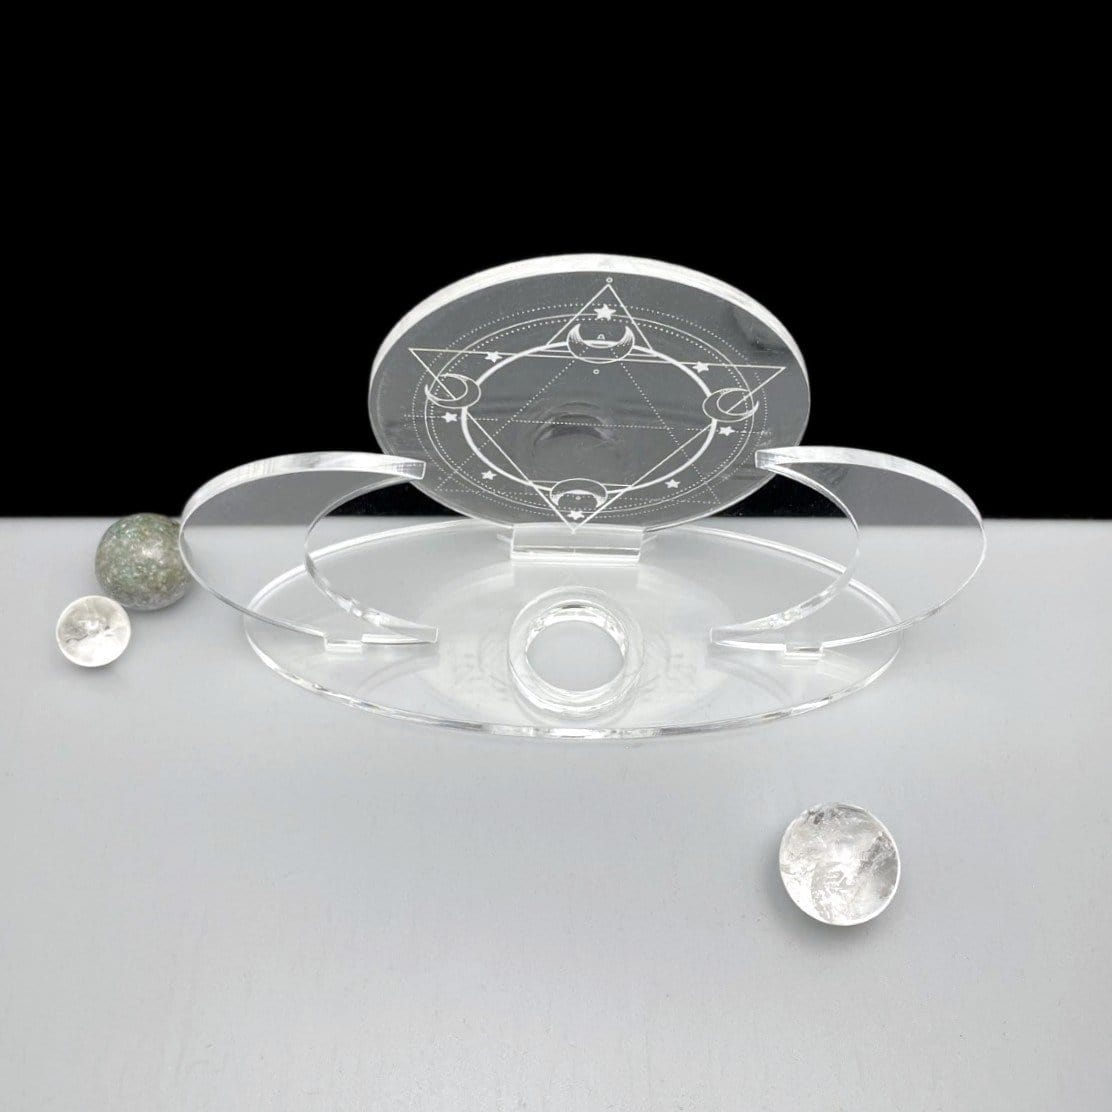 An empty Acrylic Sphere Holder Crescent Moons - Six Pointed Star surrounded with smaller spheres for display.